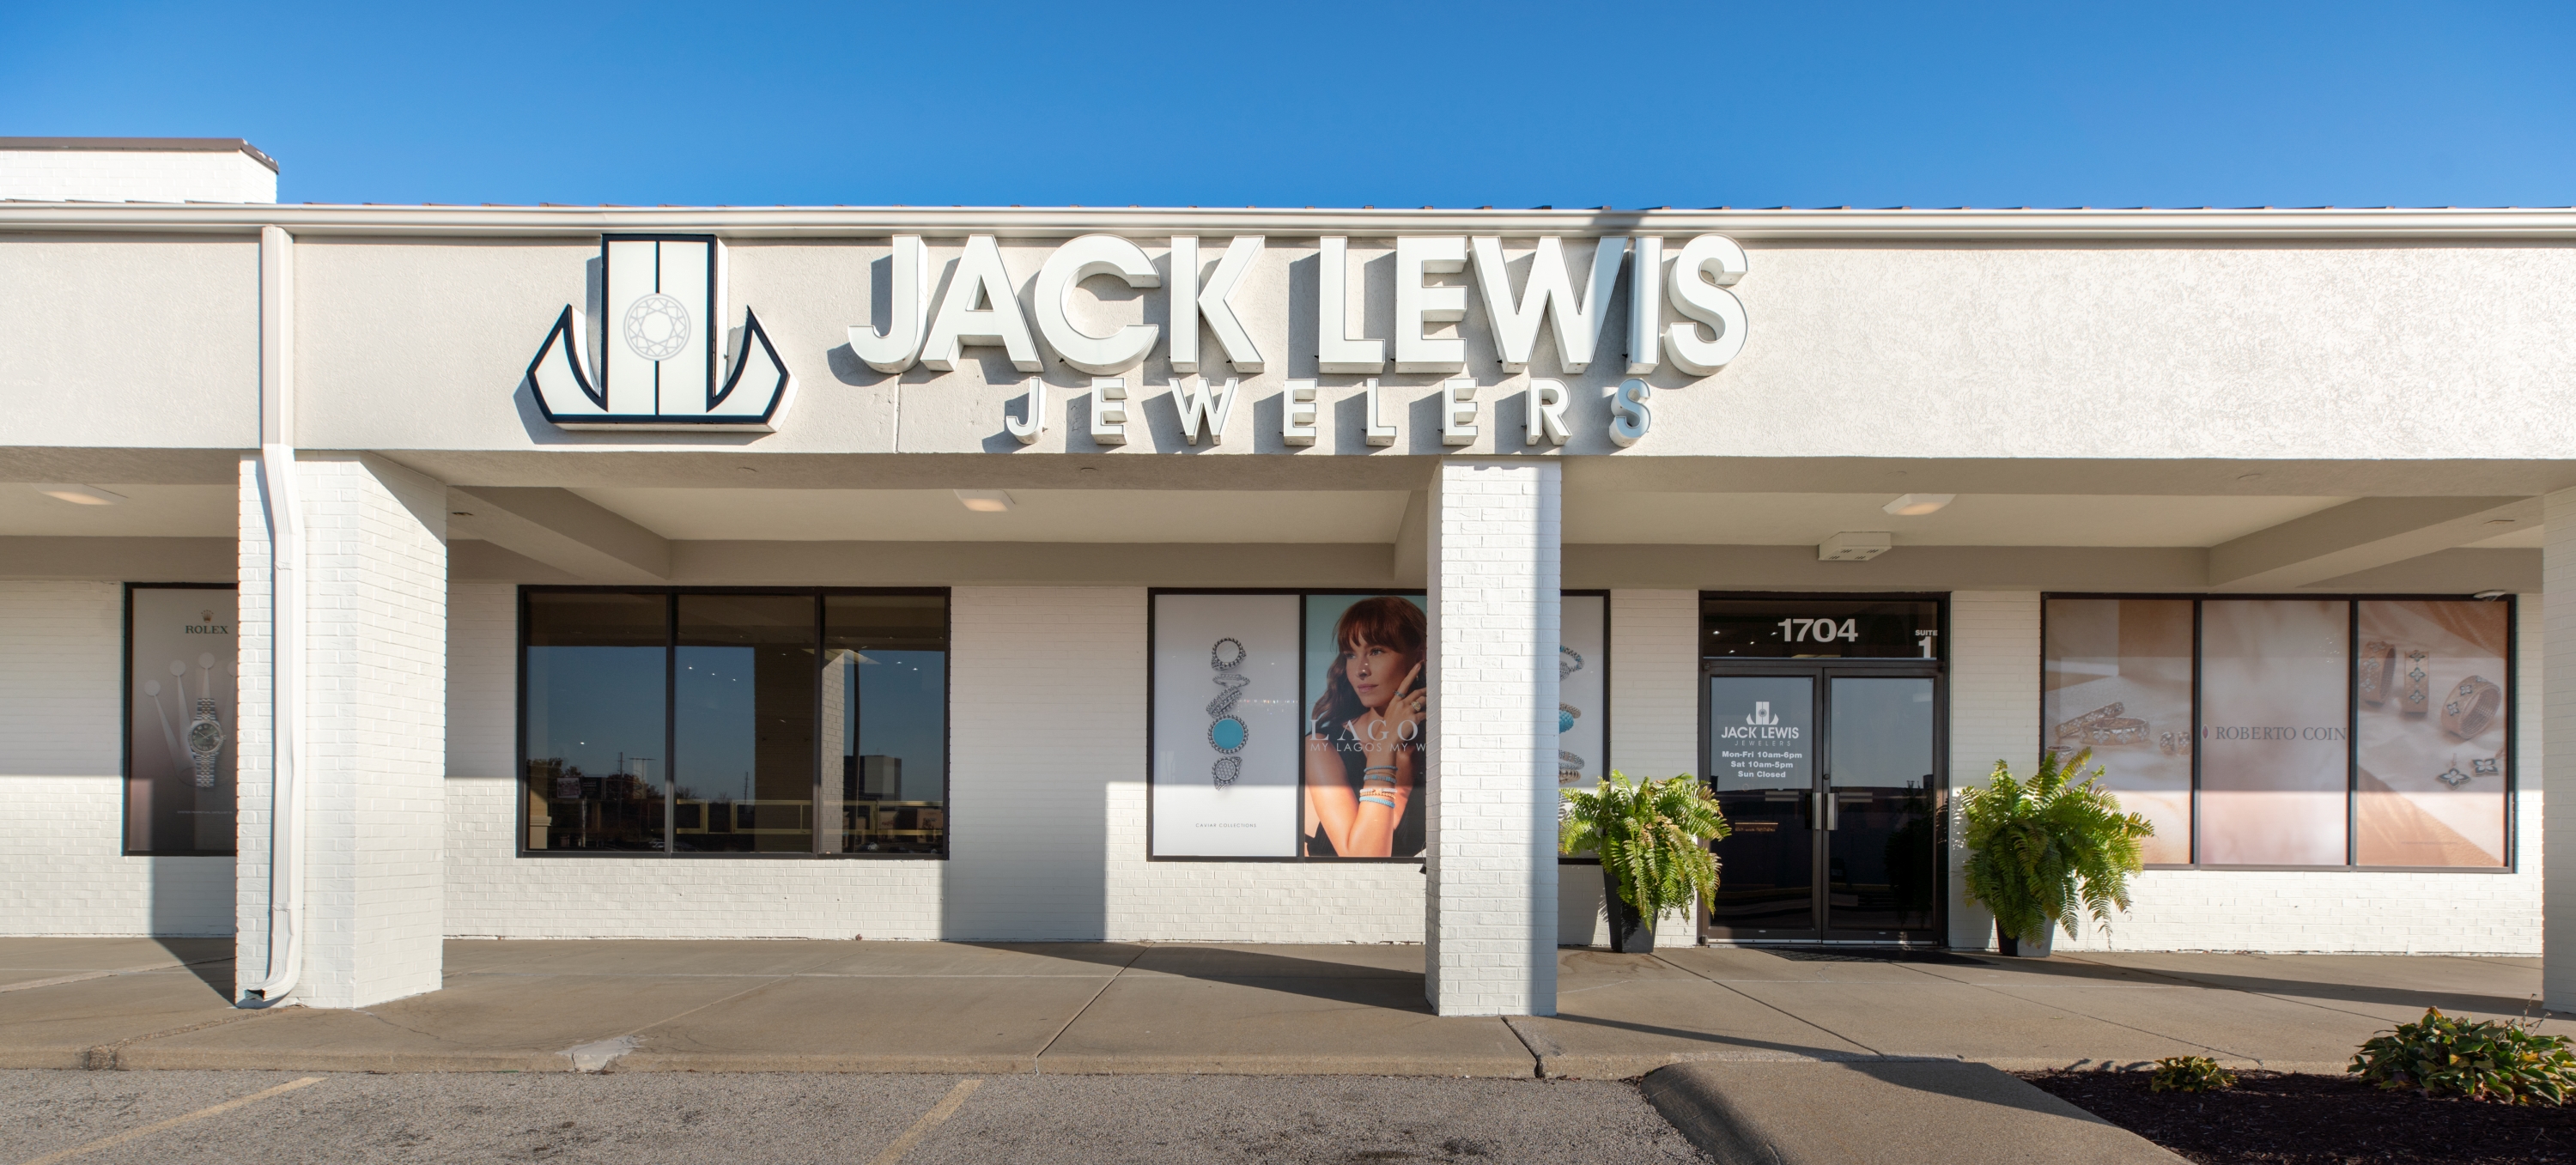 Since 1927, Jack Lewis Jewelers has been Bloomington-Normal’s jewelry store.